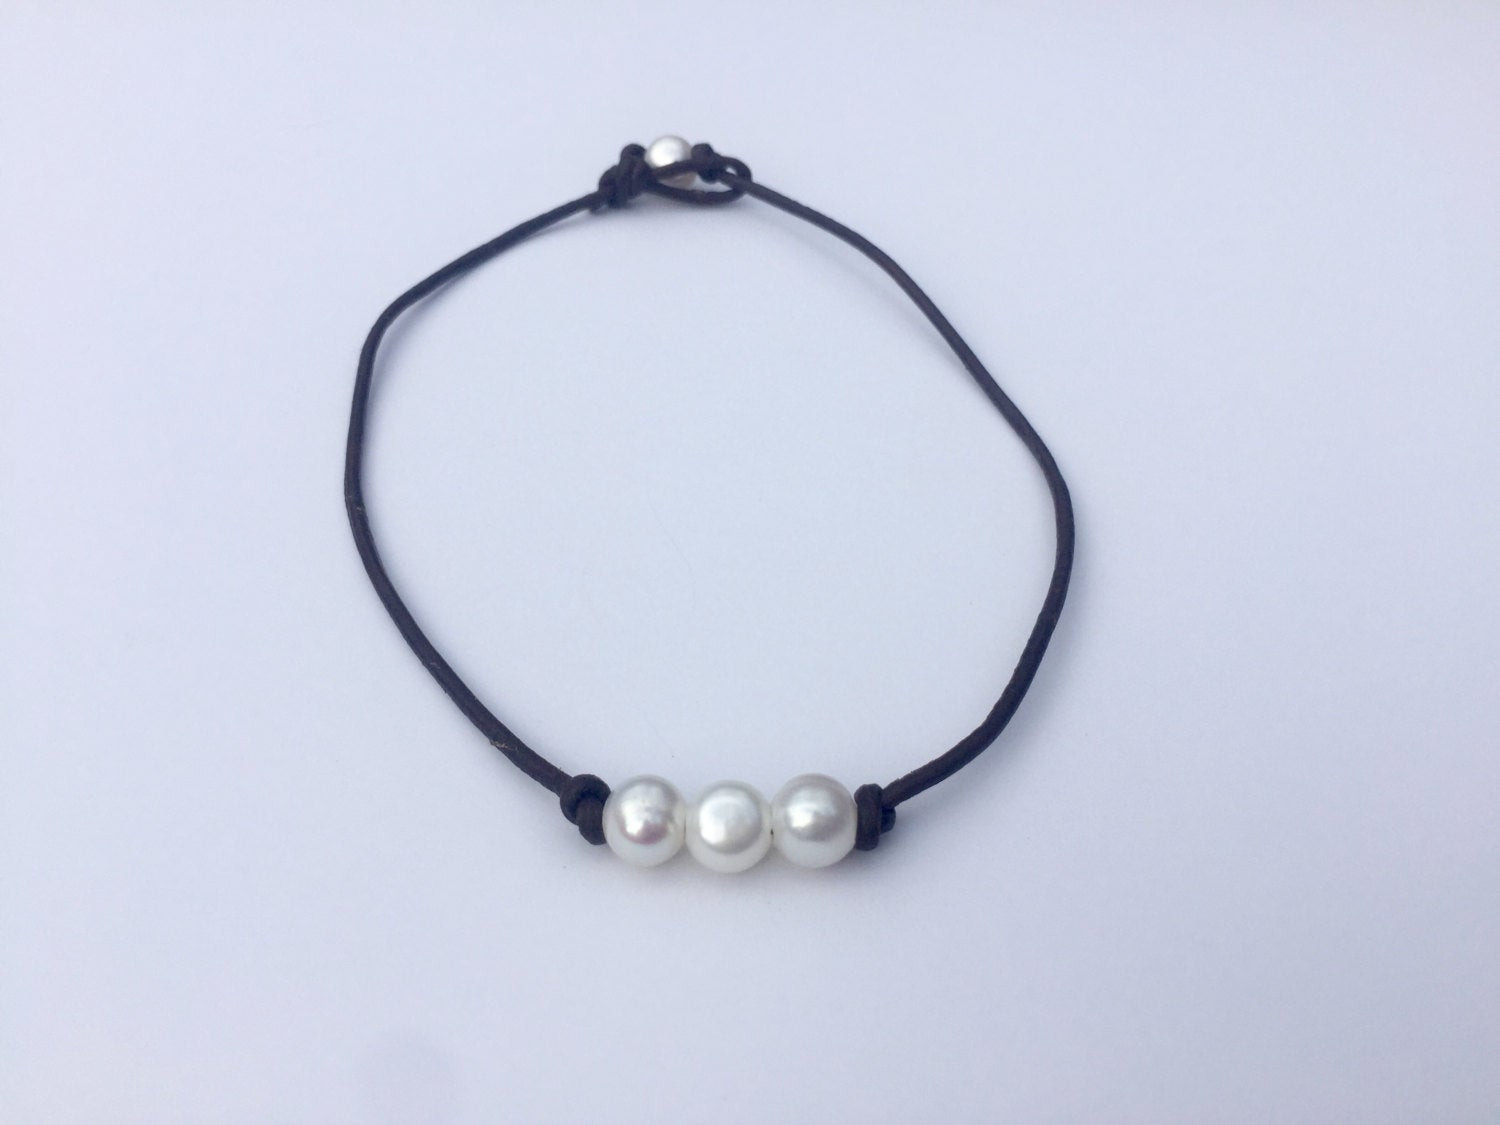 Freshwater Pearl Leather Necklace
 Three Freshwater Pearl Leather Necklace